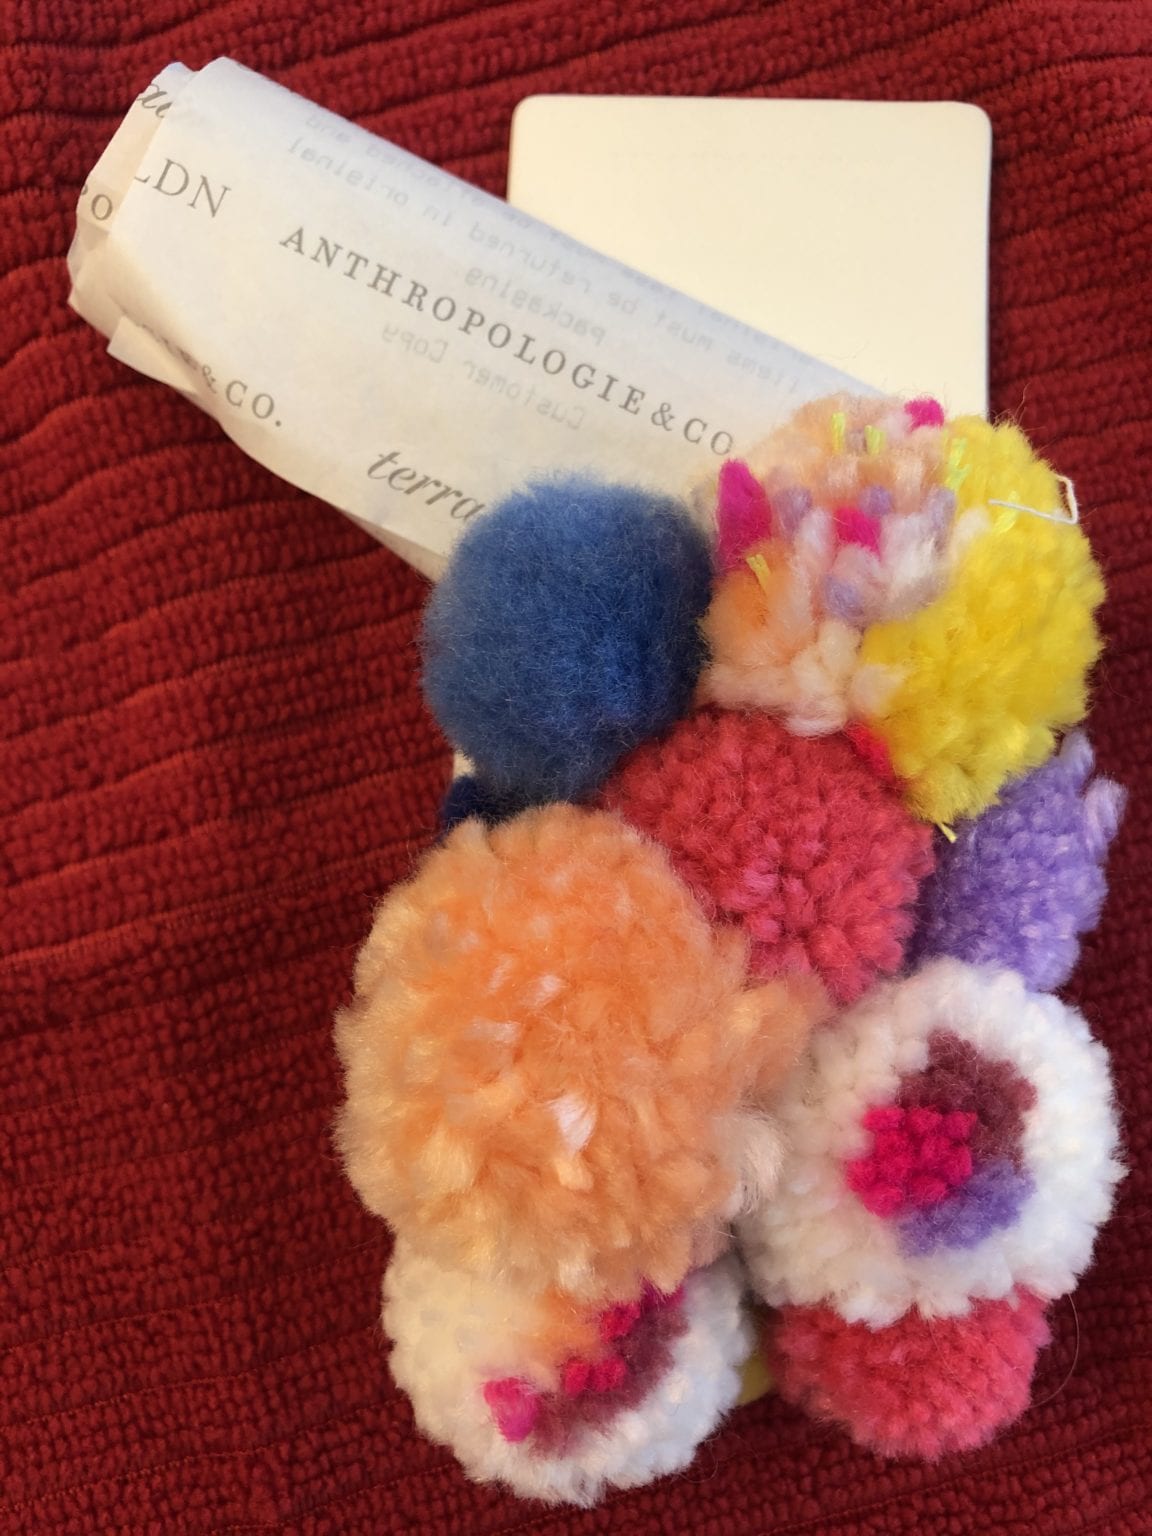 Anthropologie Gift Card Los Angeles House of Ruth